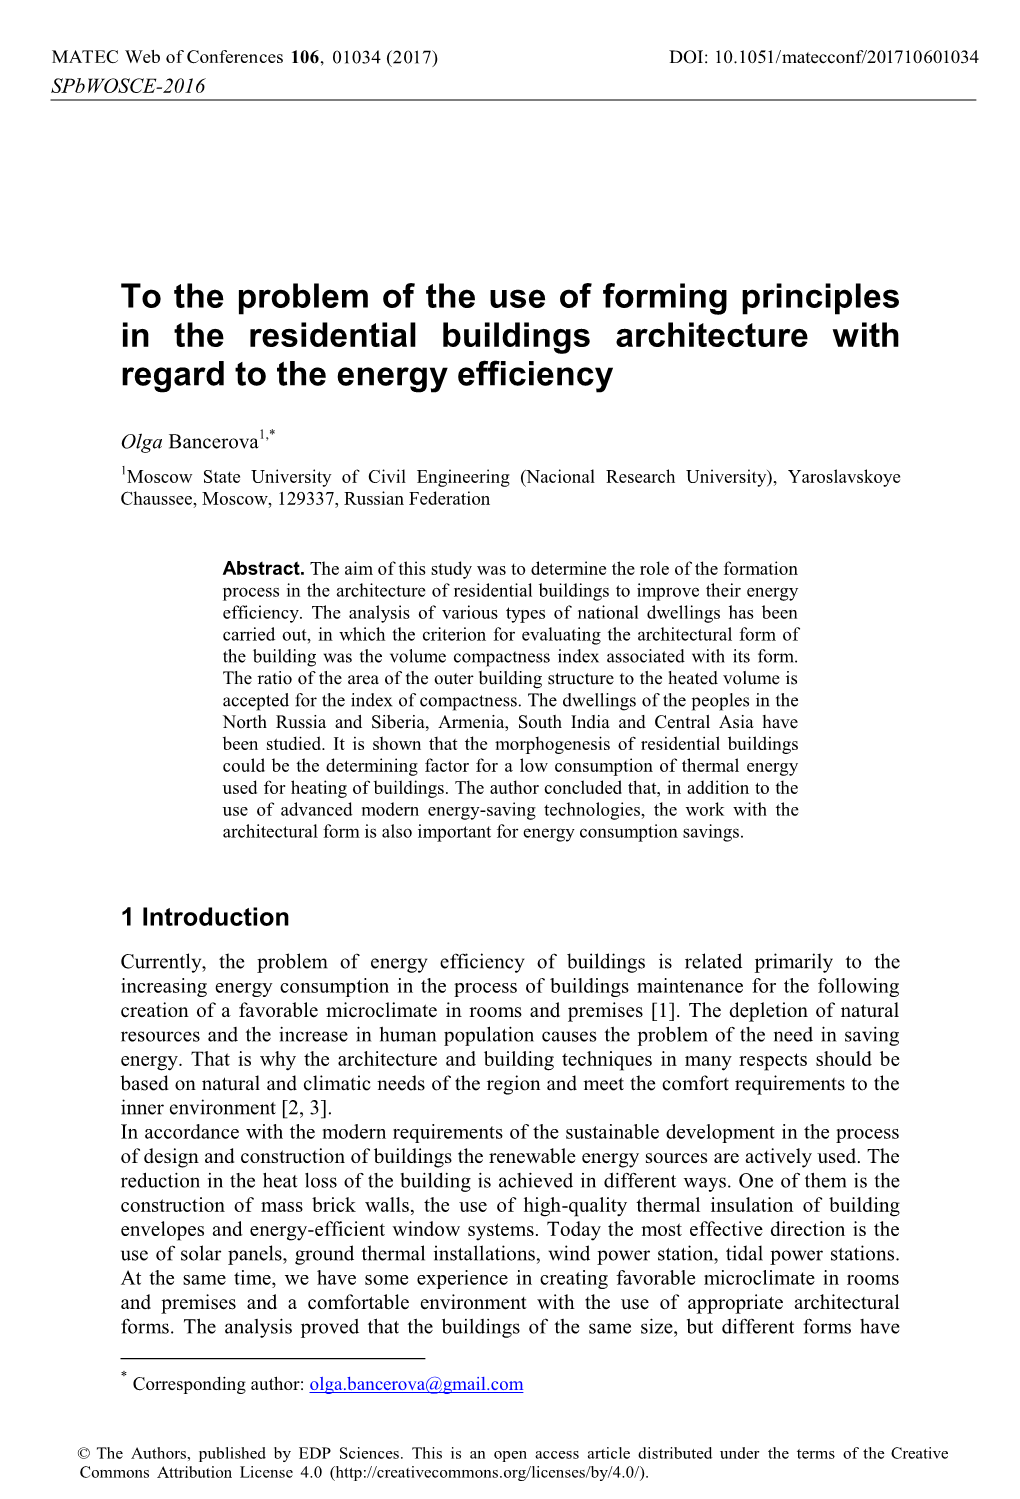 To the Problem of the Use of Forming Principles in the Residential Buildings Architecture with Regard to the Energy Efficiency